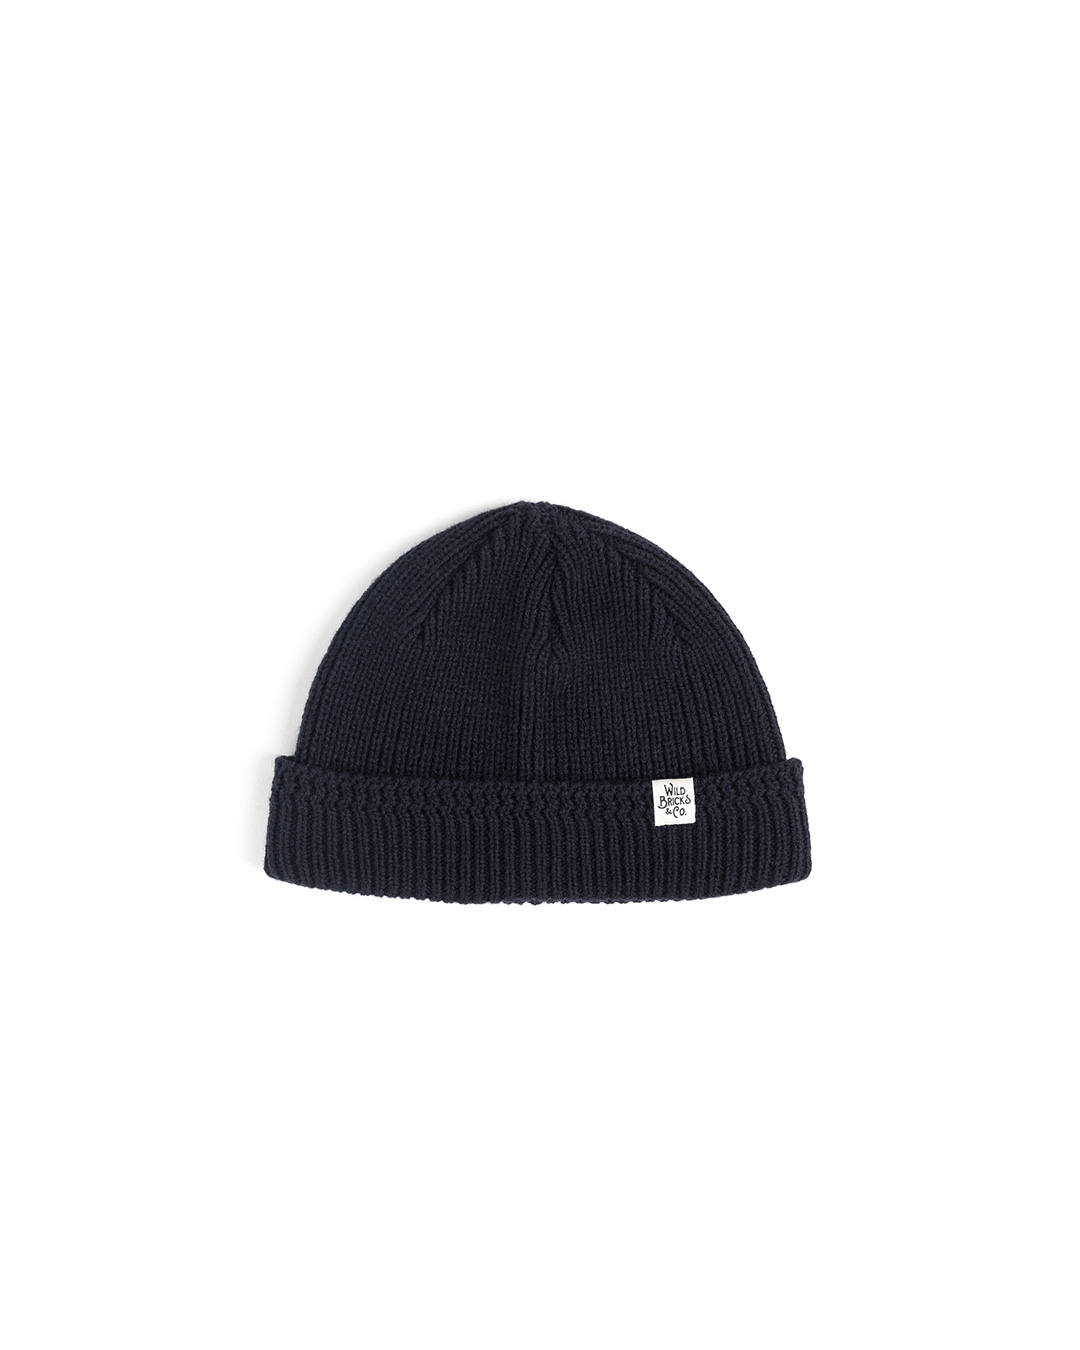 MILITARY KNIT WATCH CAP (navy)